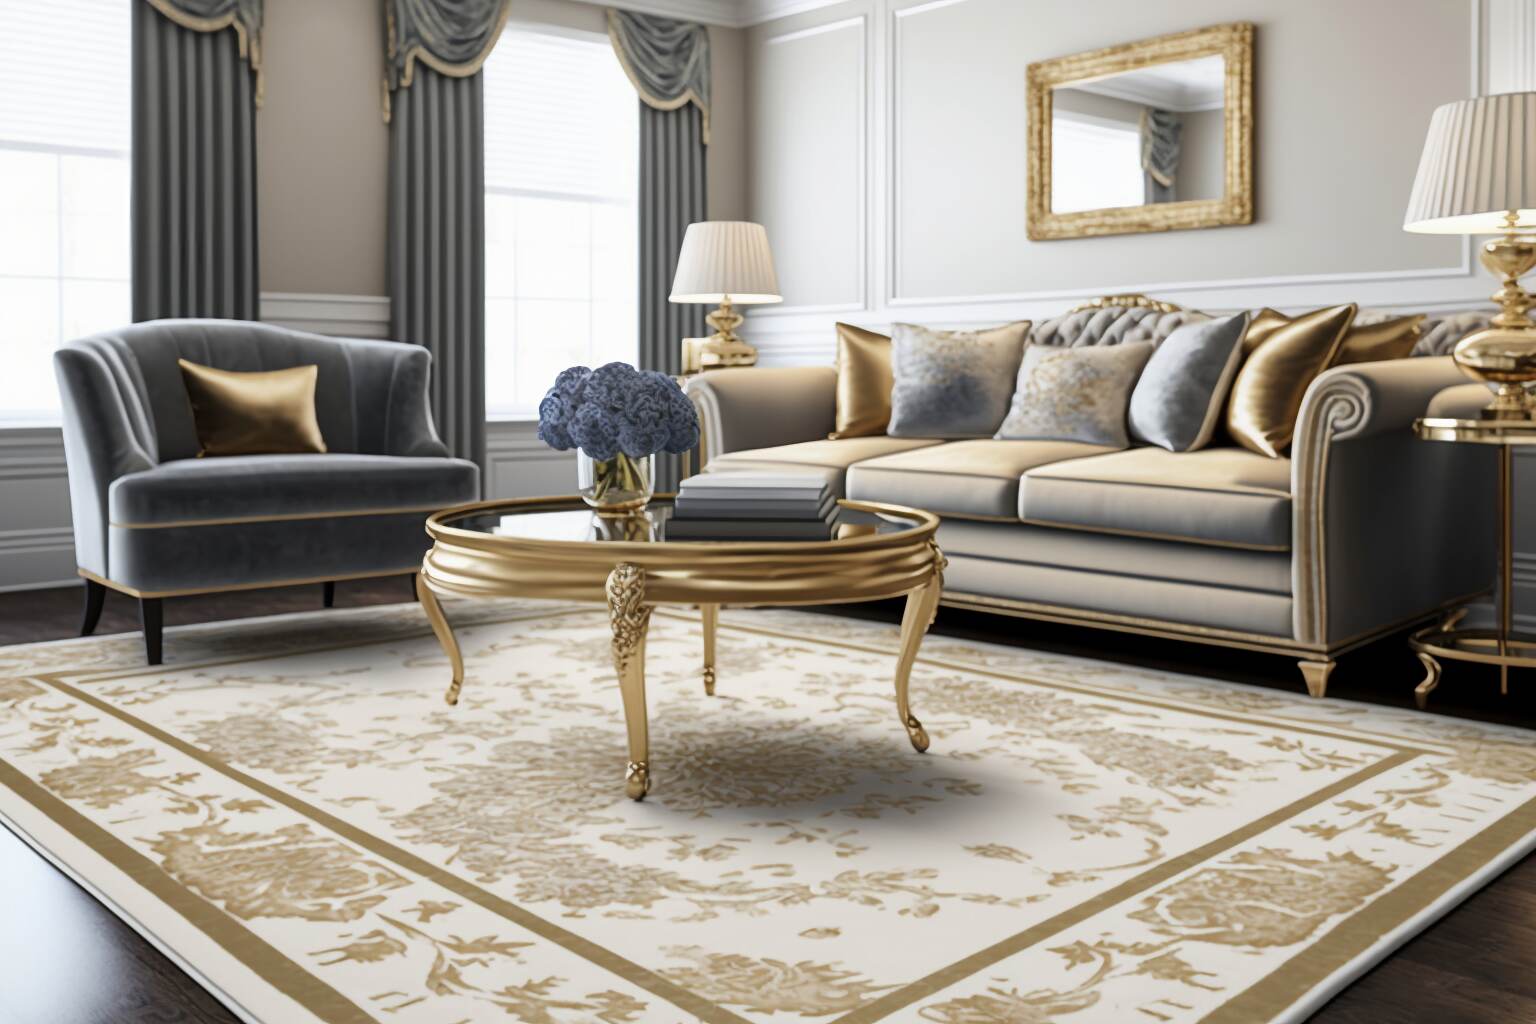 Sophisticated Traditional Living Room With Elegant Furniture